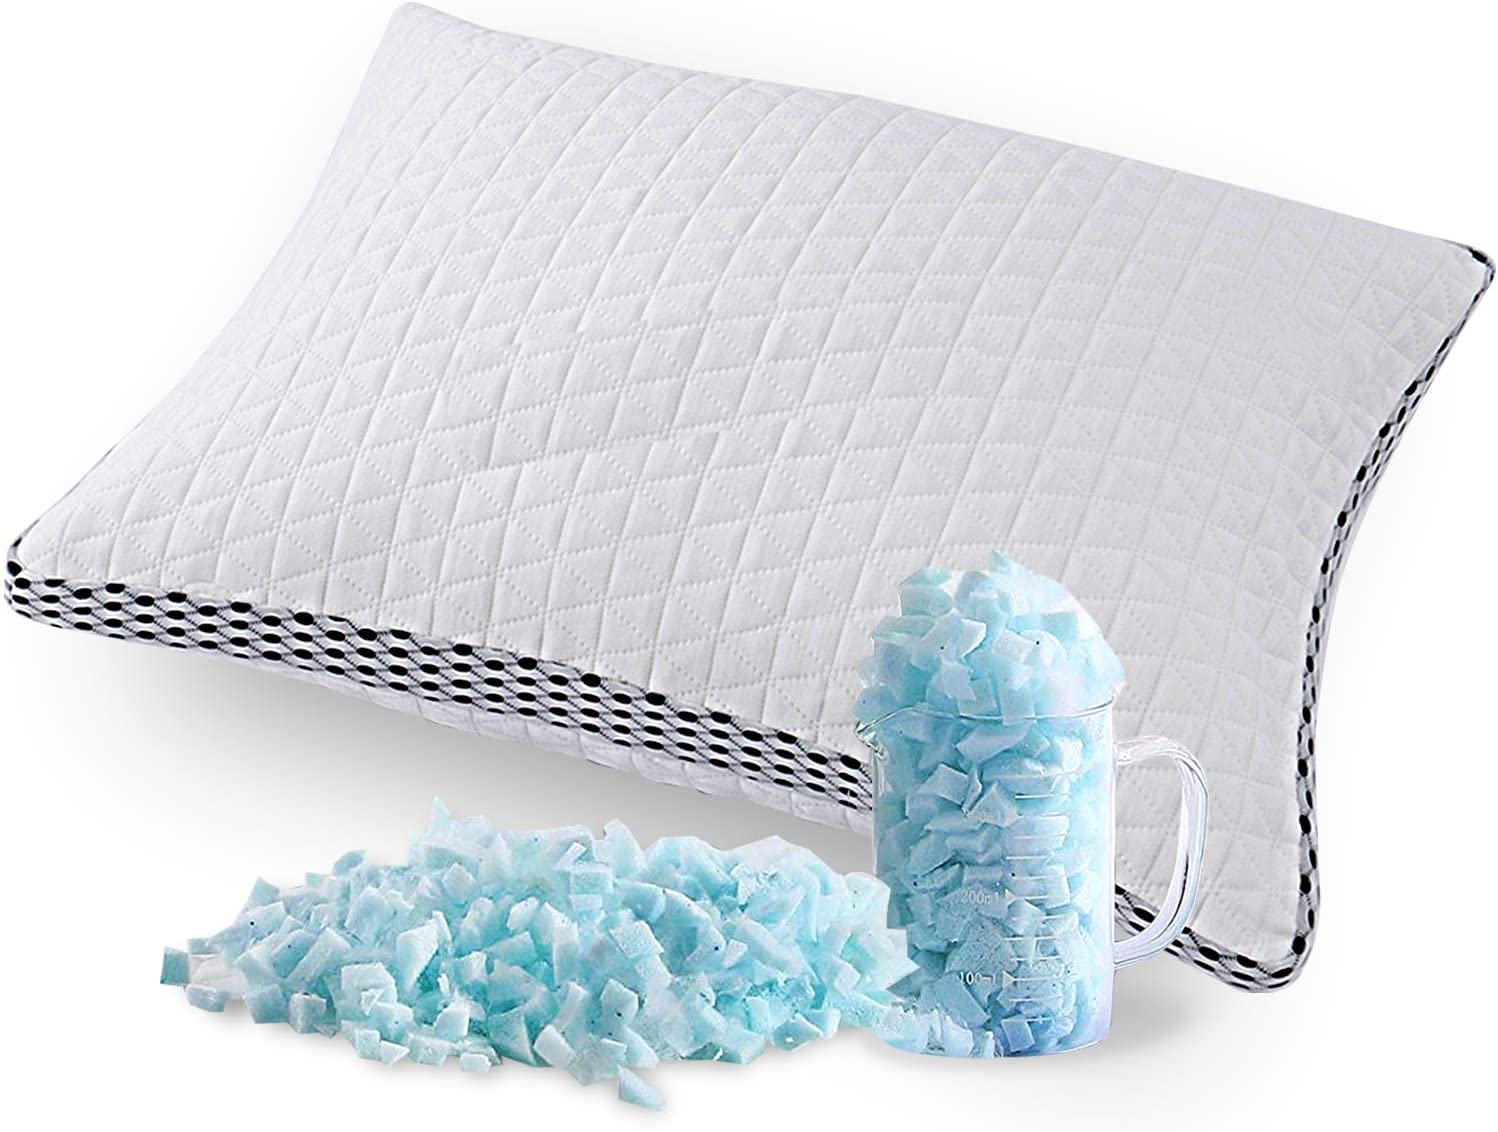  Everything about this cooling pillow amazon feels high quality and well made. It arrives in a neat carry box and the 